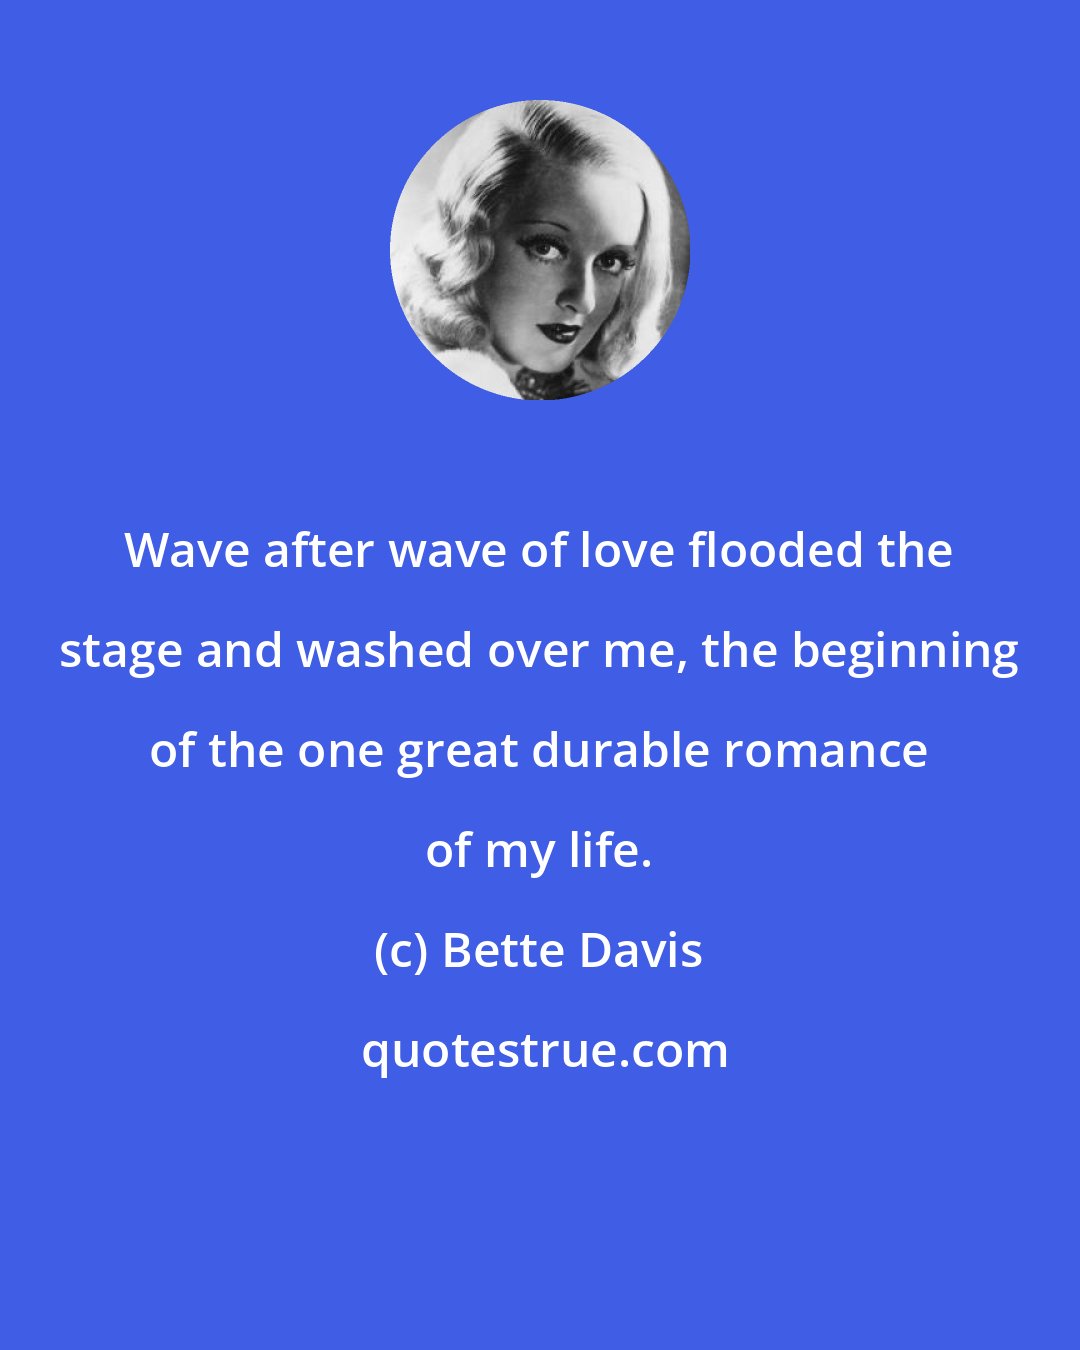 Bette Davis: Wave after wave of love flooded the stage and washed over me, the beginning of the one great durable romance of my life.